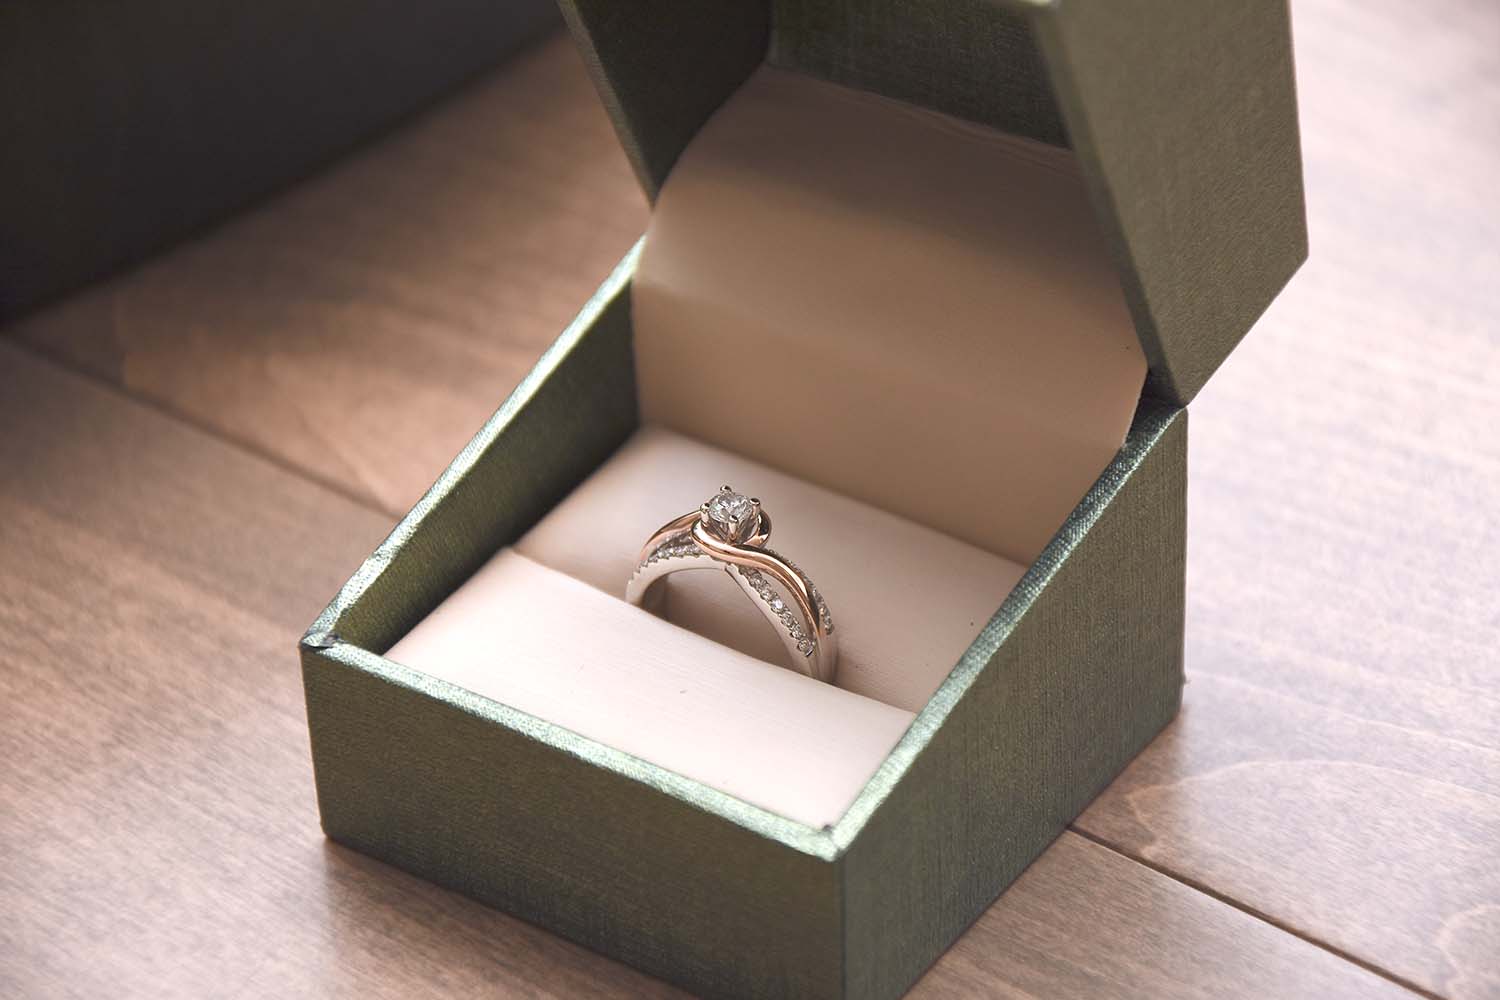 Online Engagement Rings Market Booming